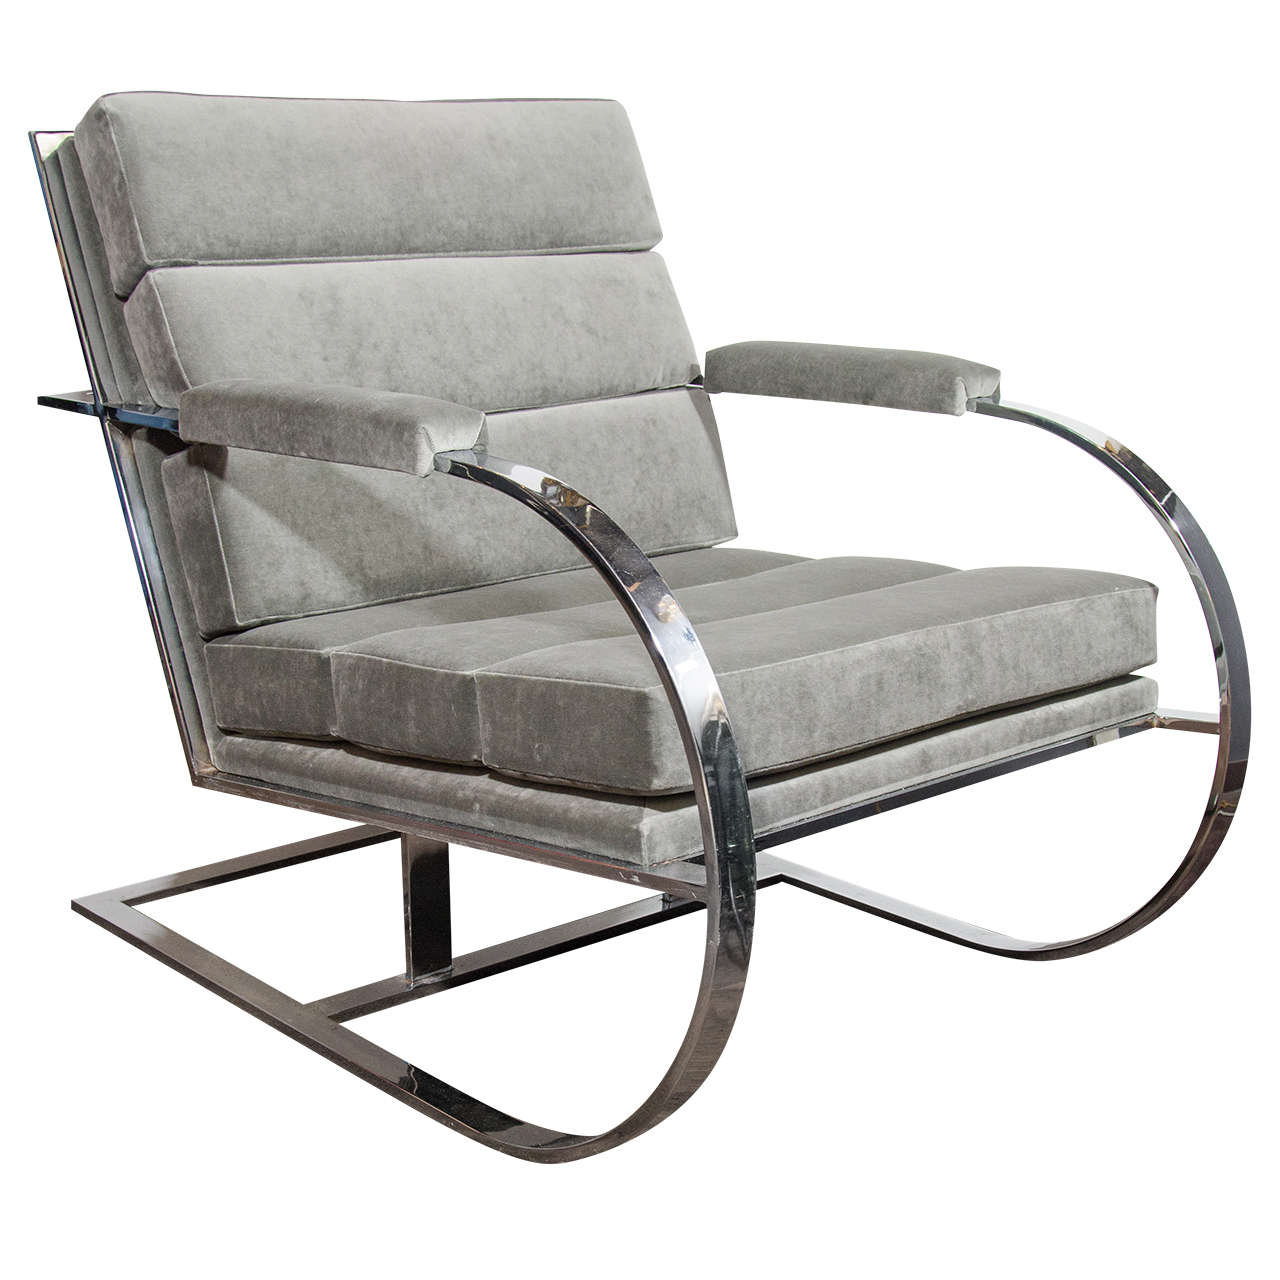 Exceptional large lounge chair with deep-seat design. Combines a curved cantilevered frame in heavy chromed steel with a luxurious horizontal channel tufted seat. The ample armrest, back, and seat are all upholstered in a luxe medium grey velvet